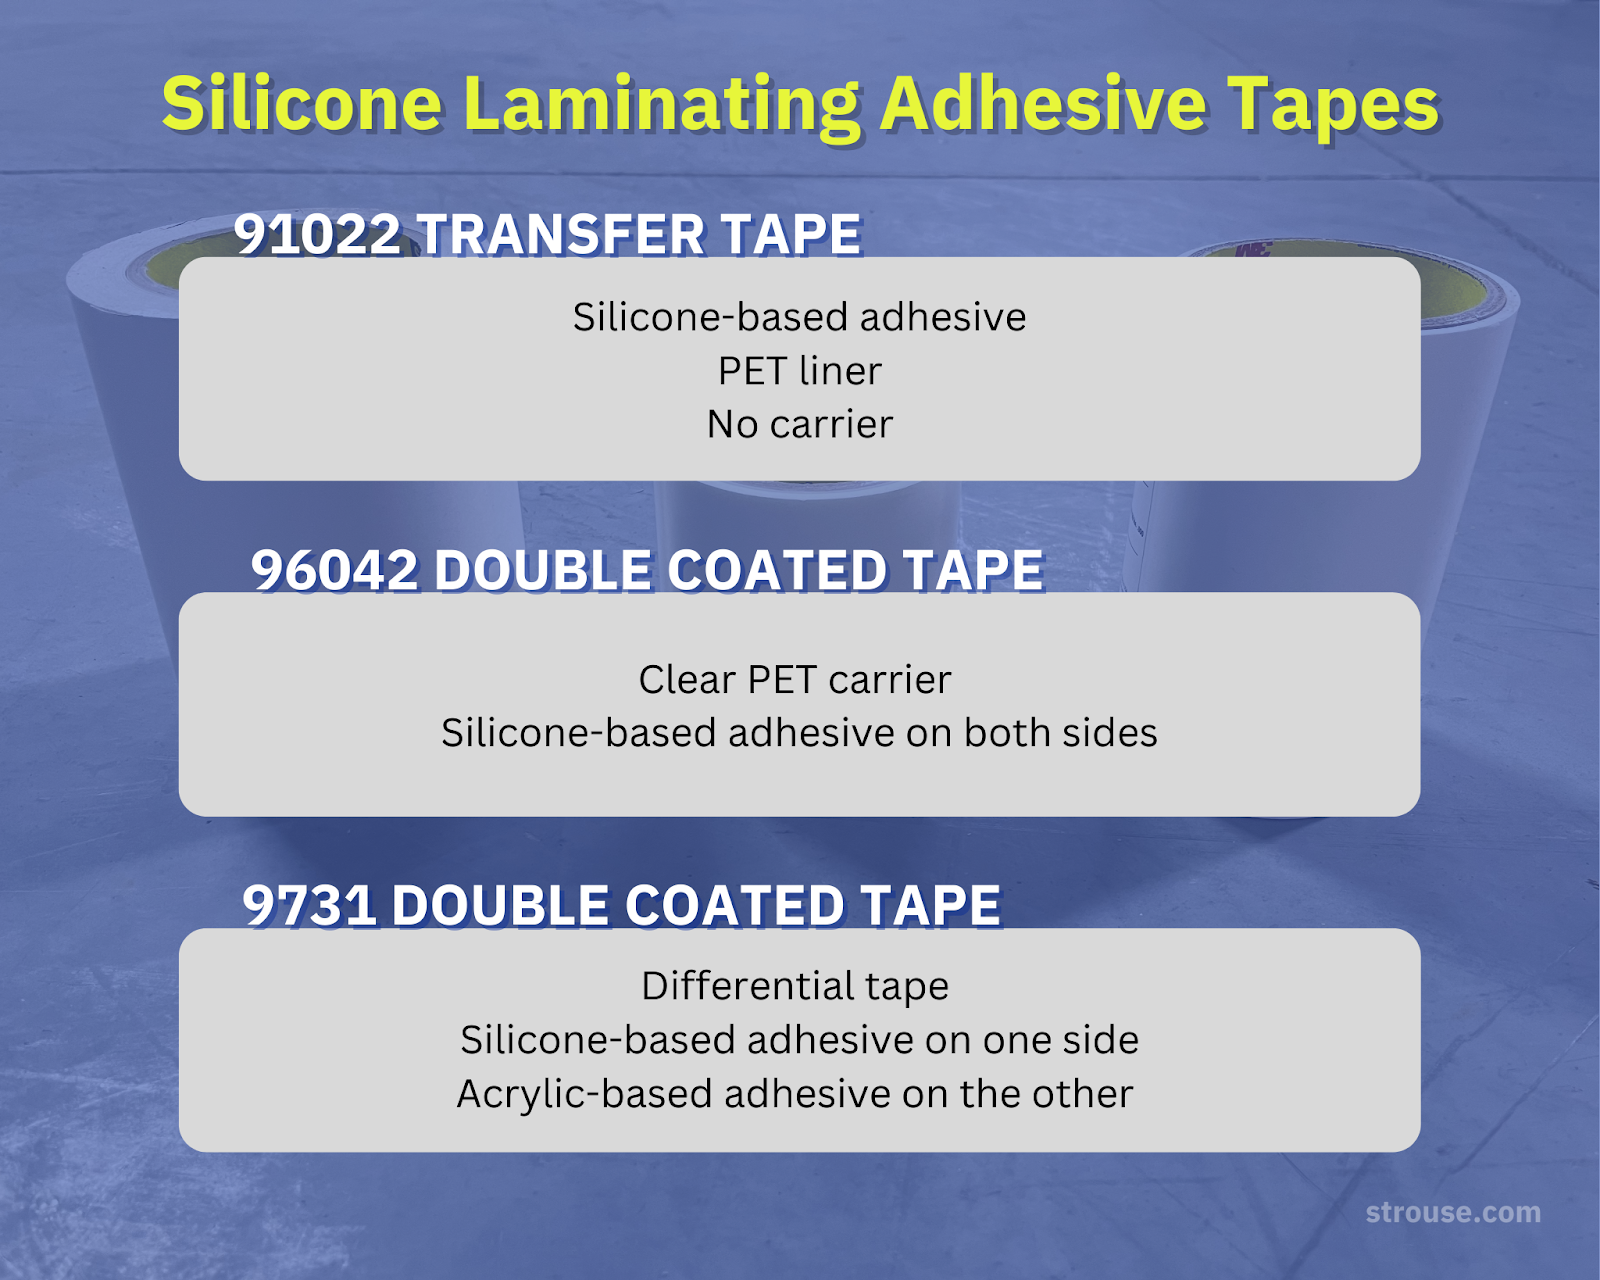 Guide to 3M Silicone Laminating Adhesive Tapes